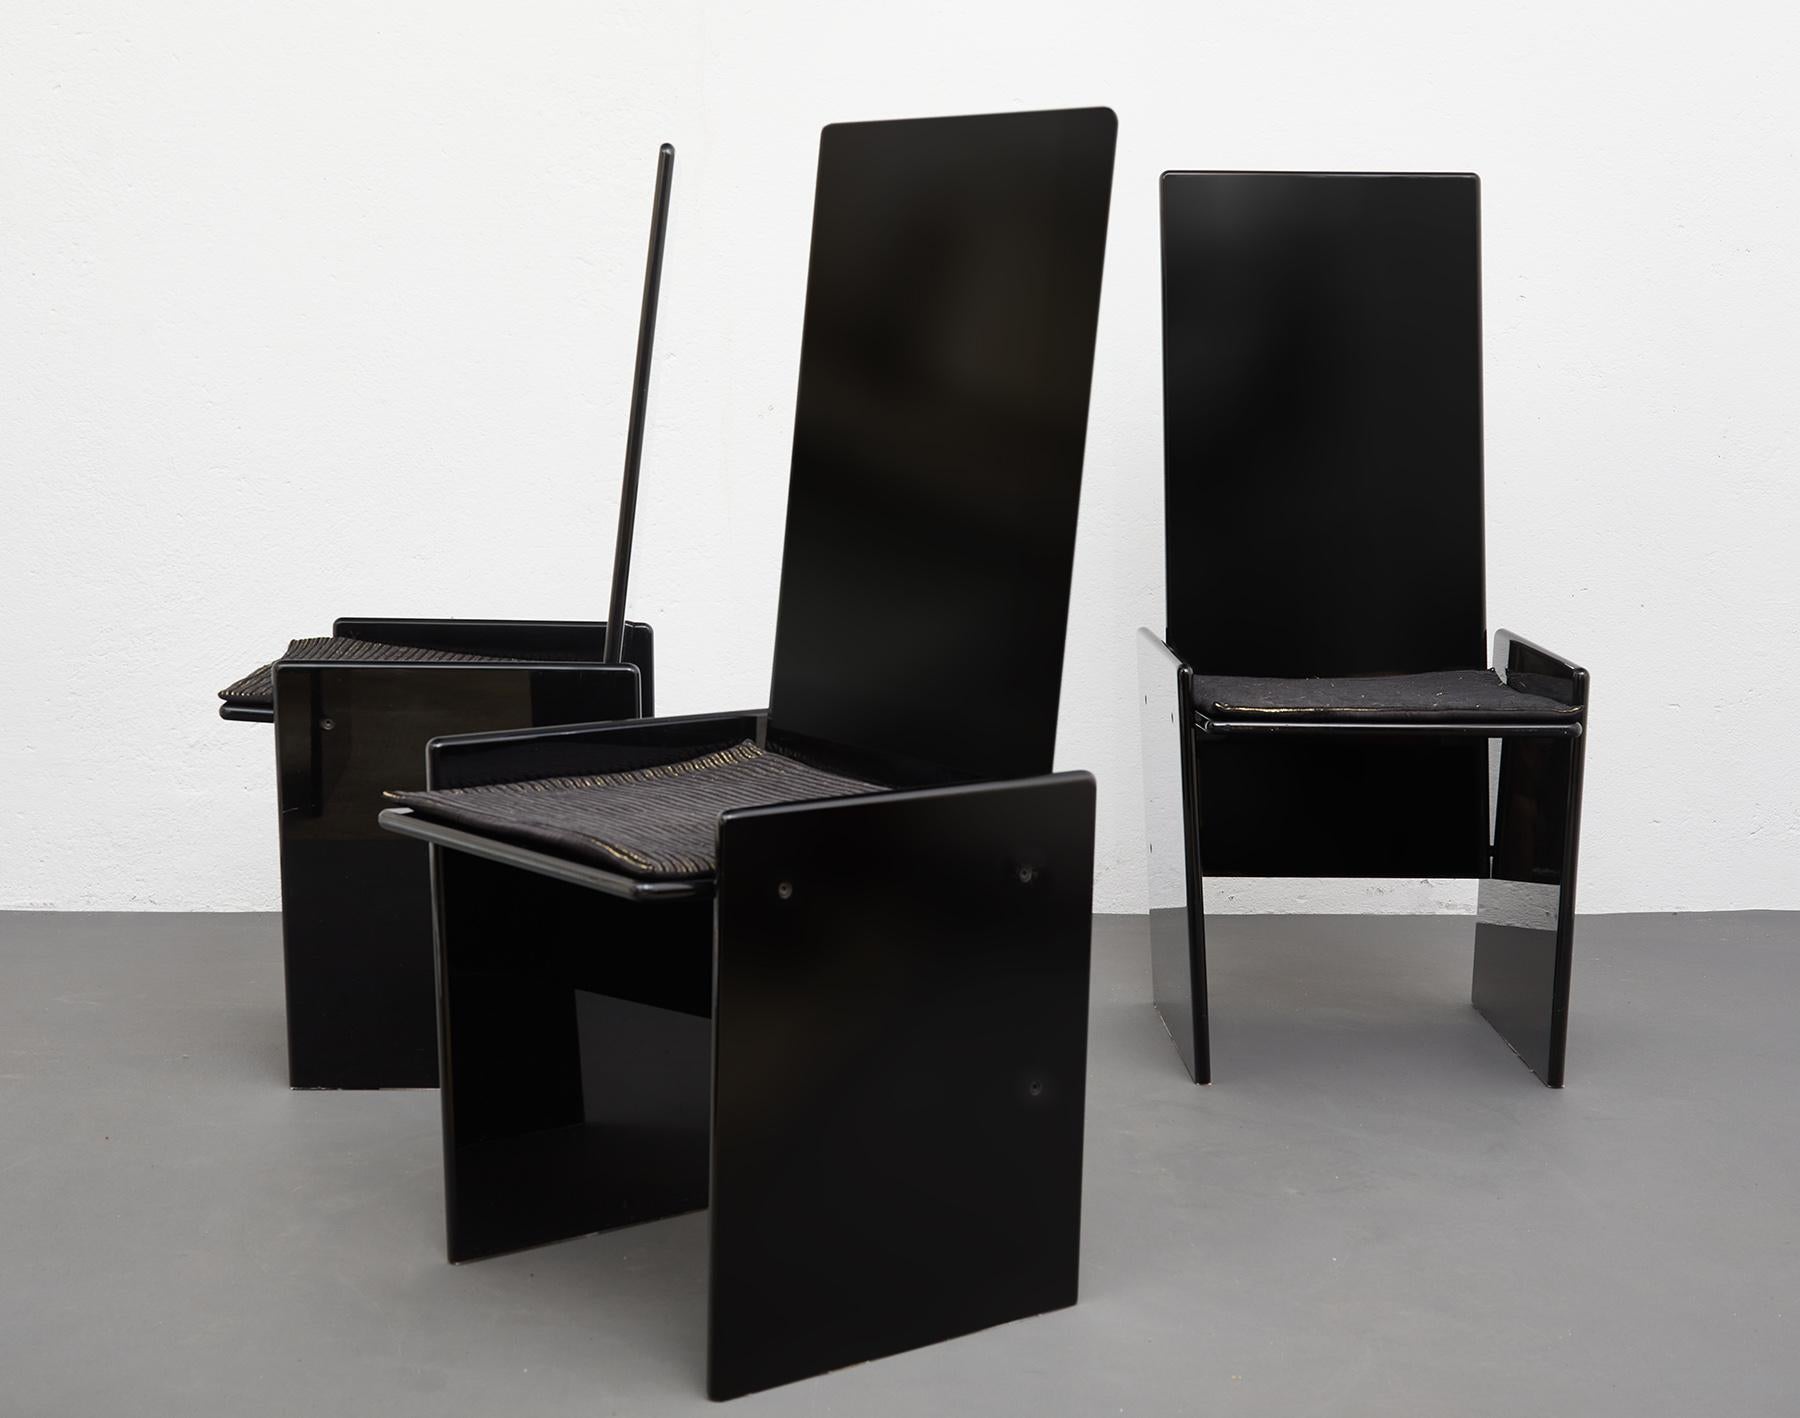 Black lacquered wood dining chairs Kazuki by Kazuhide Takahama for Simon Gavina, Italy.

The Japanese architect and designer Takahama emigrated to Italy end of the 1950's to start working with Diego Gavina with whom he started a long lasting